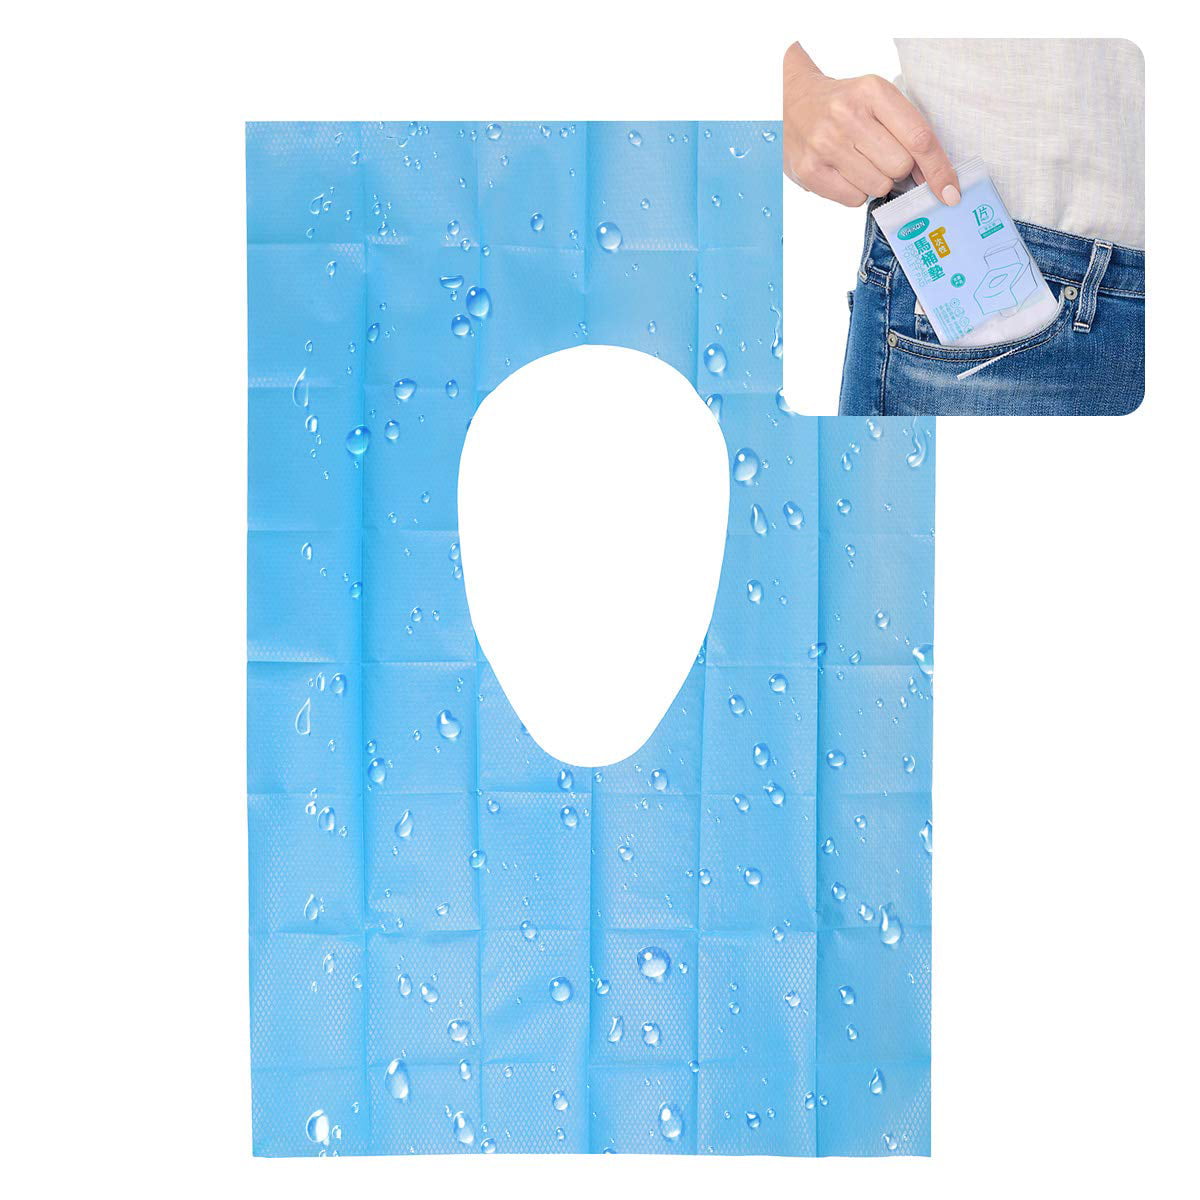 Totally 10 sheets Portable Travel Set Waterproof Individually Wrapped Toilet Seat Toilet Paper Pad for Kids or Adults Disposable Toilet Seat Covers 